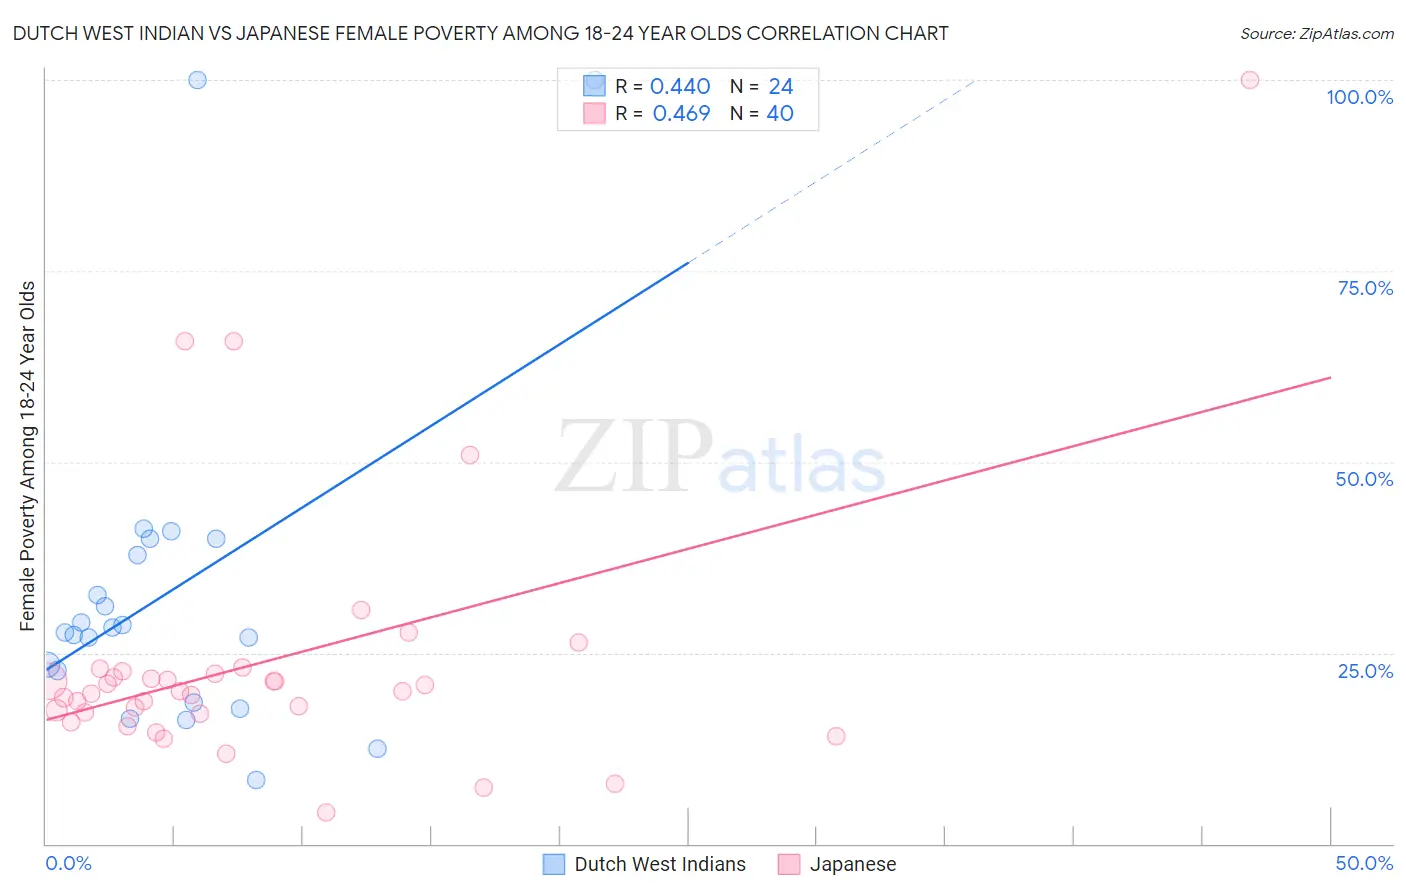 Dutch West Indian vs Japanese Female Poverty Among 18-24 Year Olds